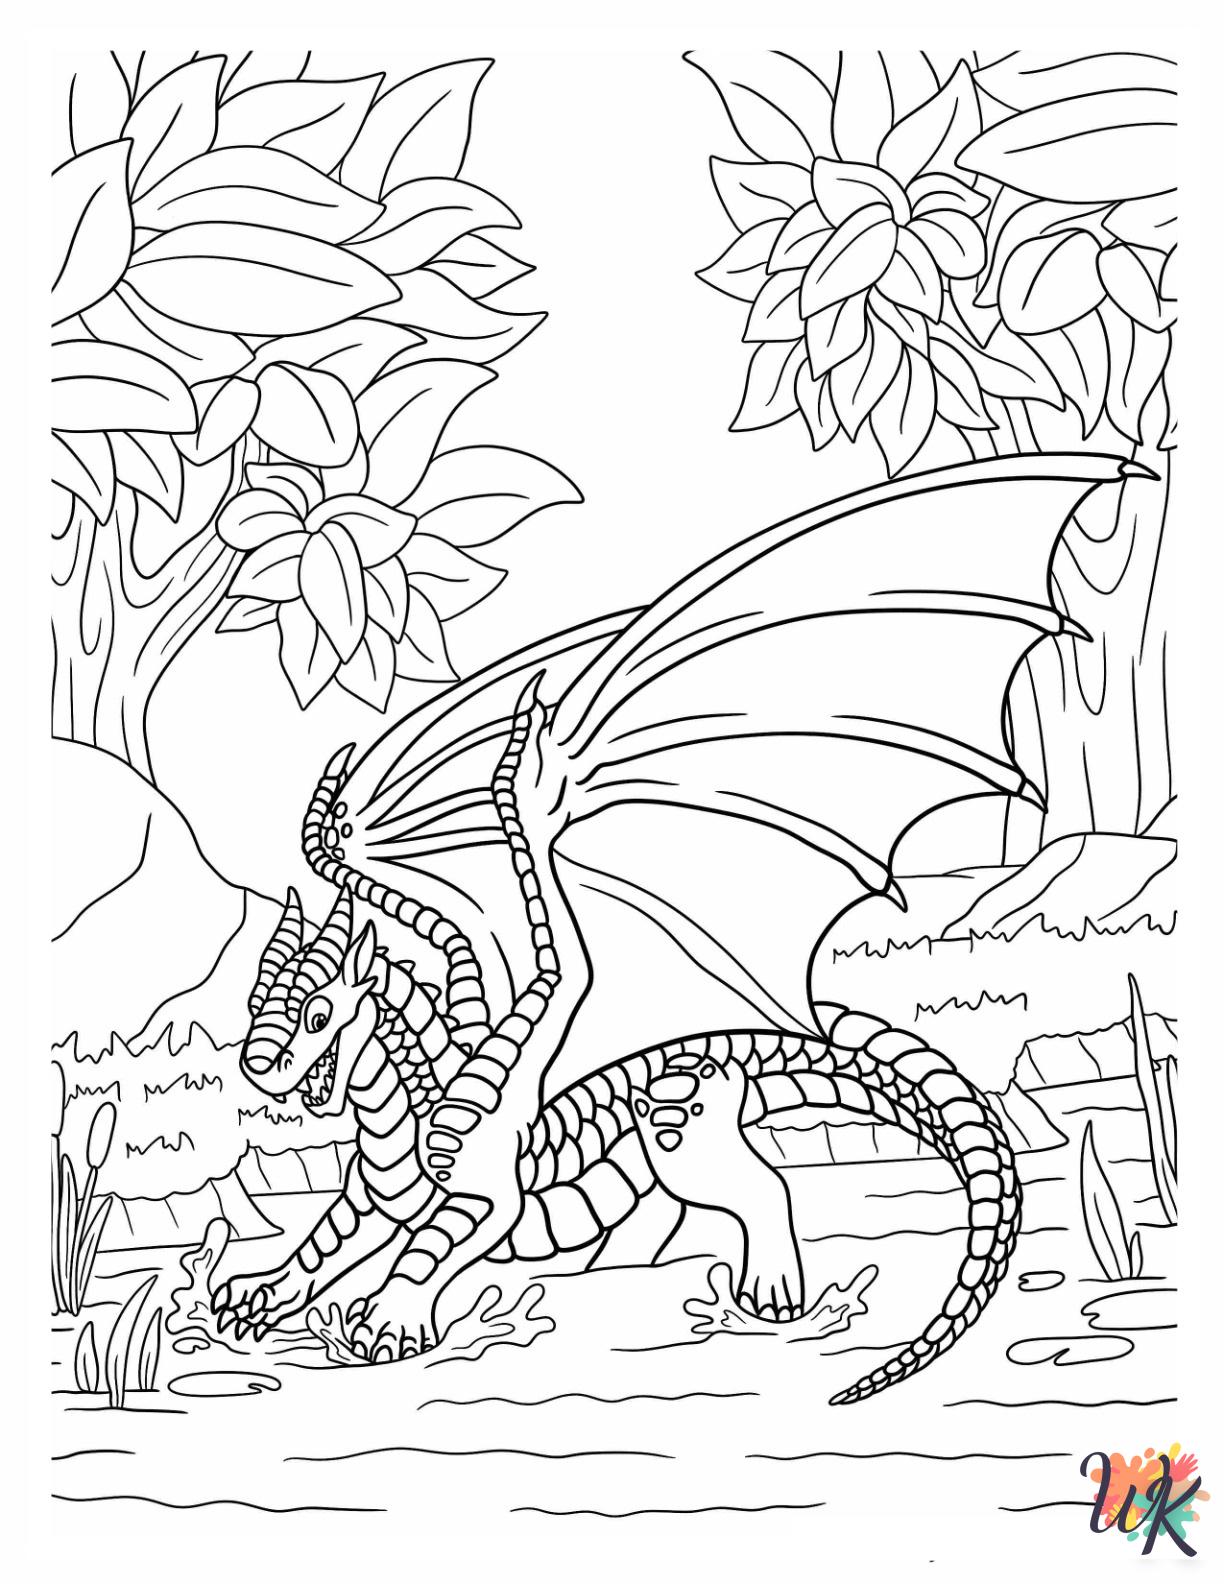 Wings Of Fire coloring pages